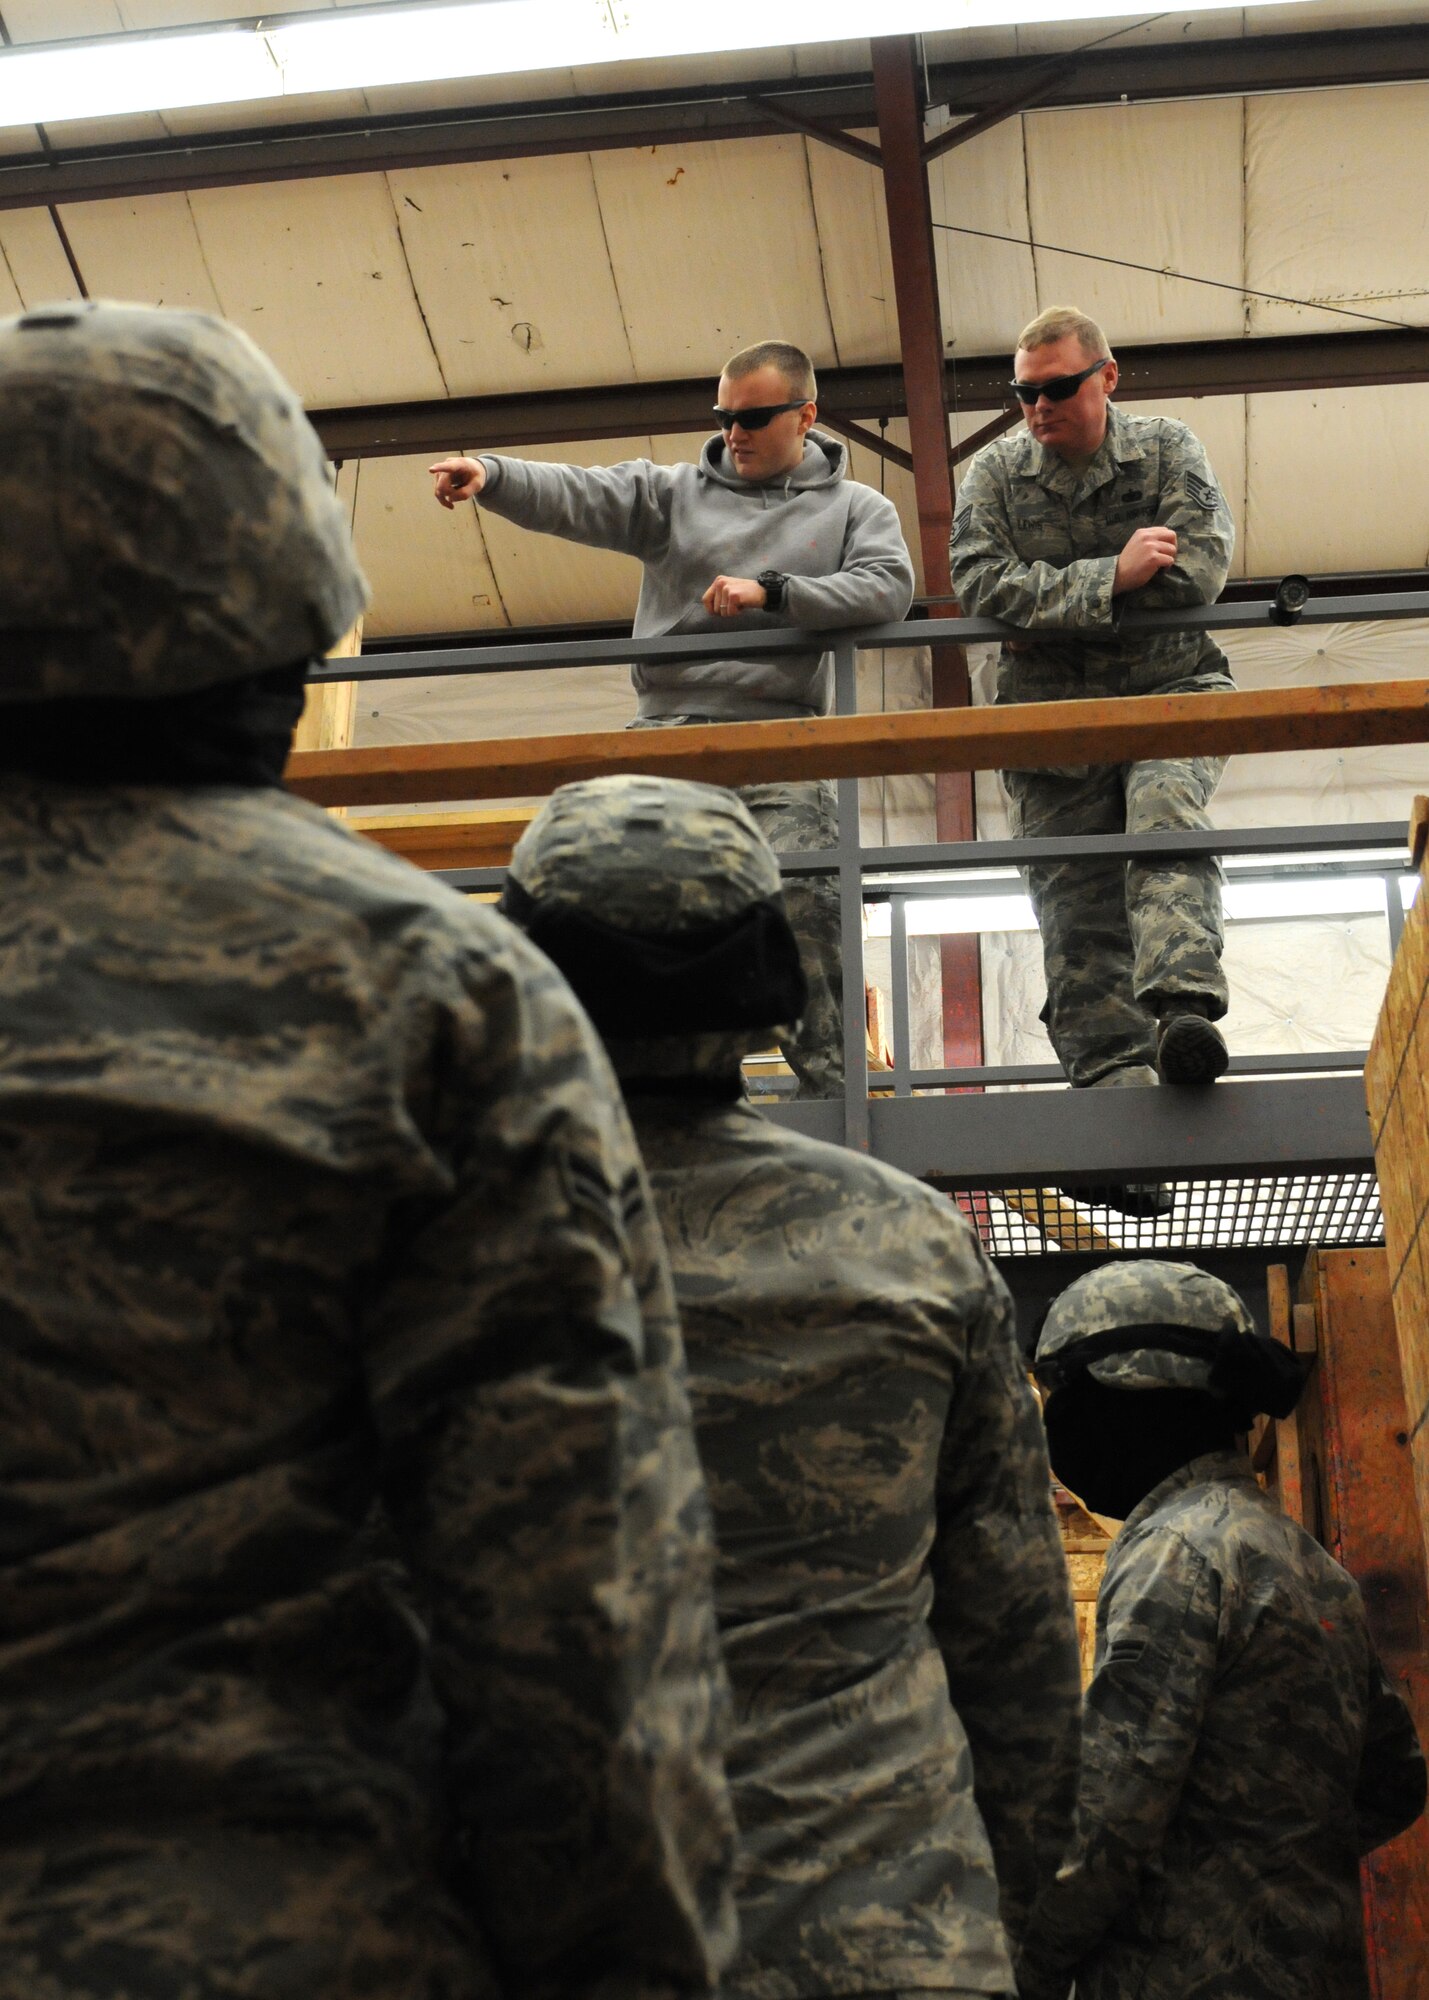 Senior Airmen Douglas Wolbeck, 790th Missile Security Forces Squadron security forces trainer, and Staff Sgt. Cory Lewis, 90th Security Support Squadron security forces trainer, provide feedback to newly trained security forces Airmen on their performance during an active shooter scenario Dec. 22, 2014, in the shoot house on F.E. Warren Air Force Base, Wyo. During Unit Orientation Training, Airmen learn how to handle active shooter situations and receive use of force training. (U.S. Air Force photo/Airman 1st Class Malcolm Mayfield)